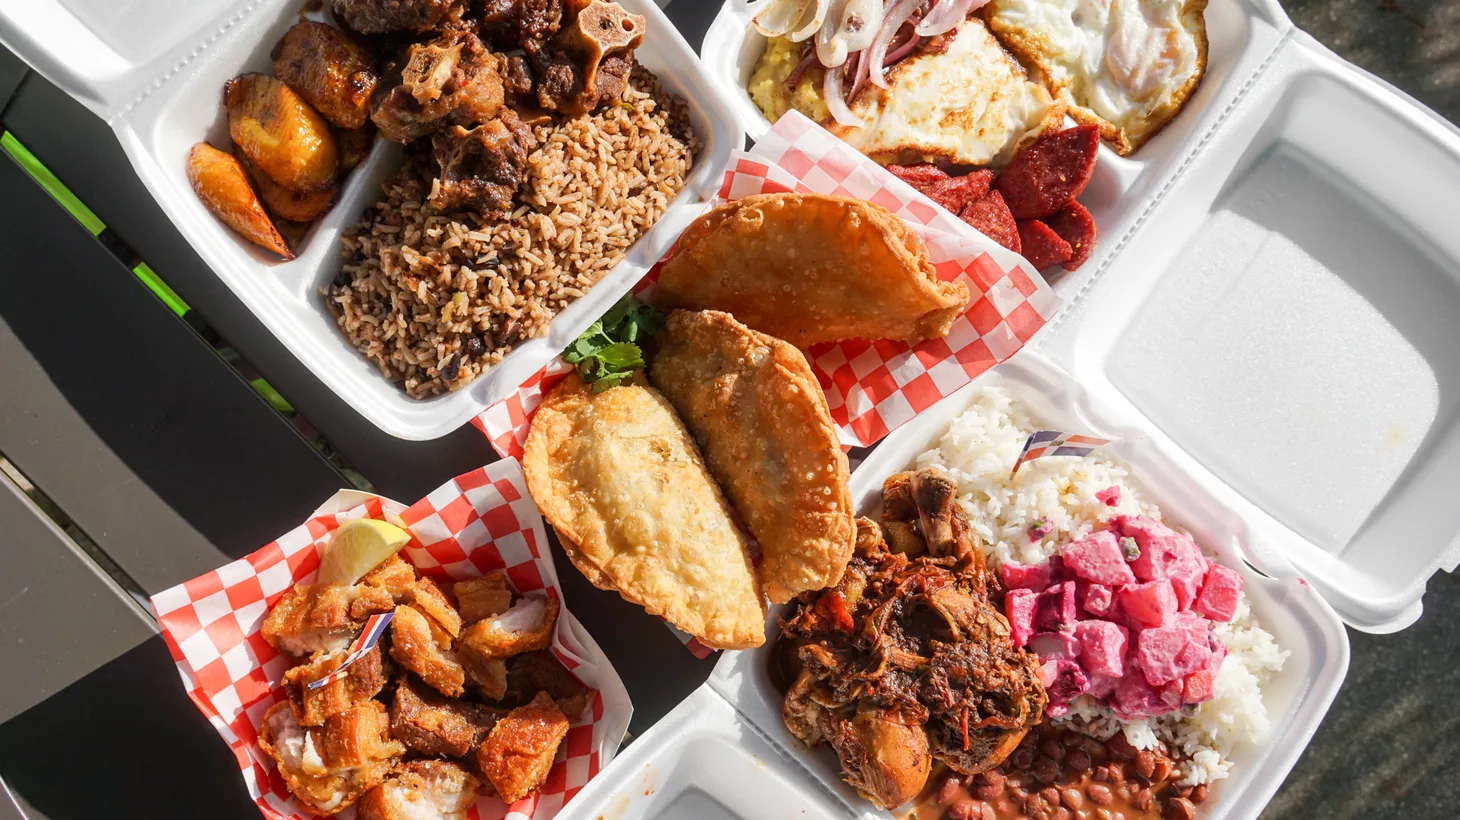 Karribean Cuisine serves oxtails, pastelitos, and tres golpes, a traditional Dominican breakfast of fried cheese, eggs, salami, and mangú (mashed plantains).